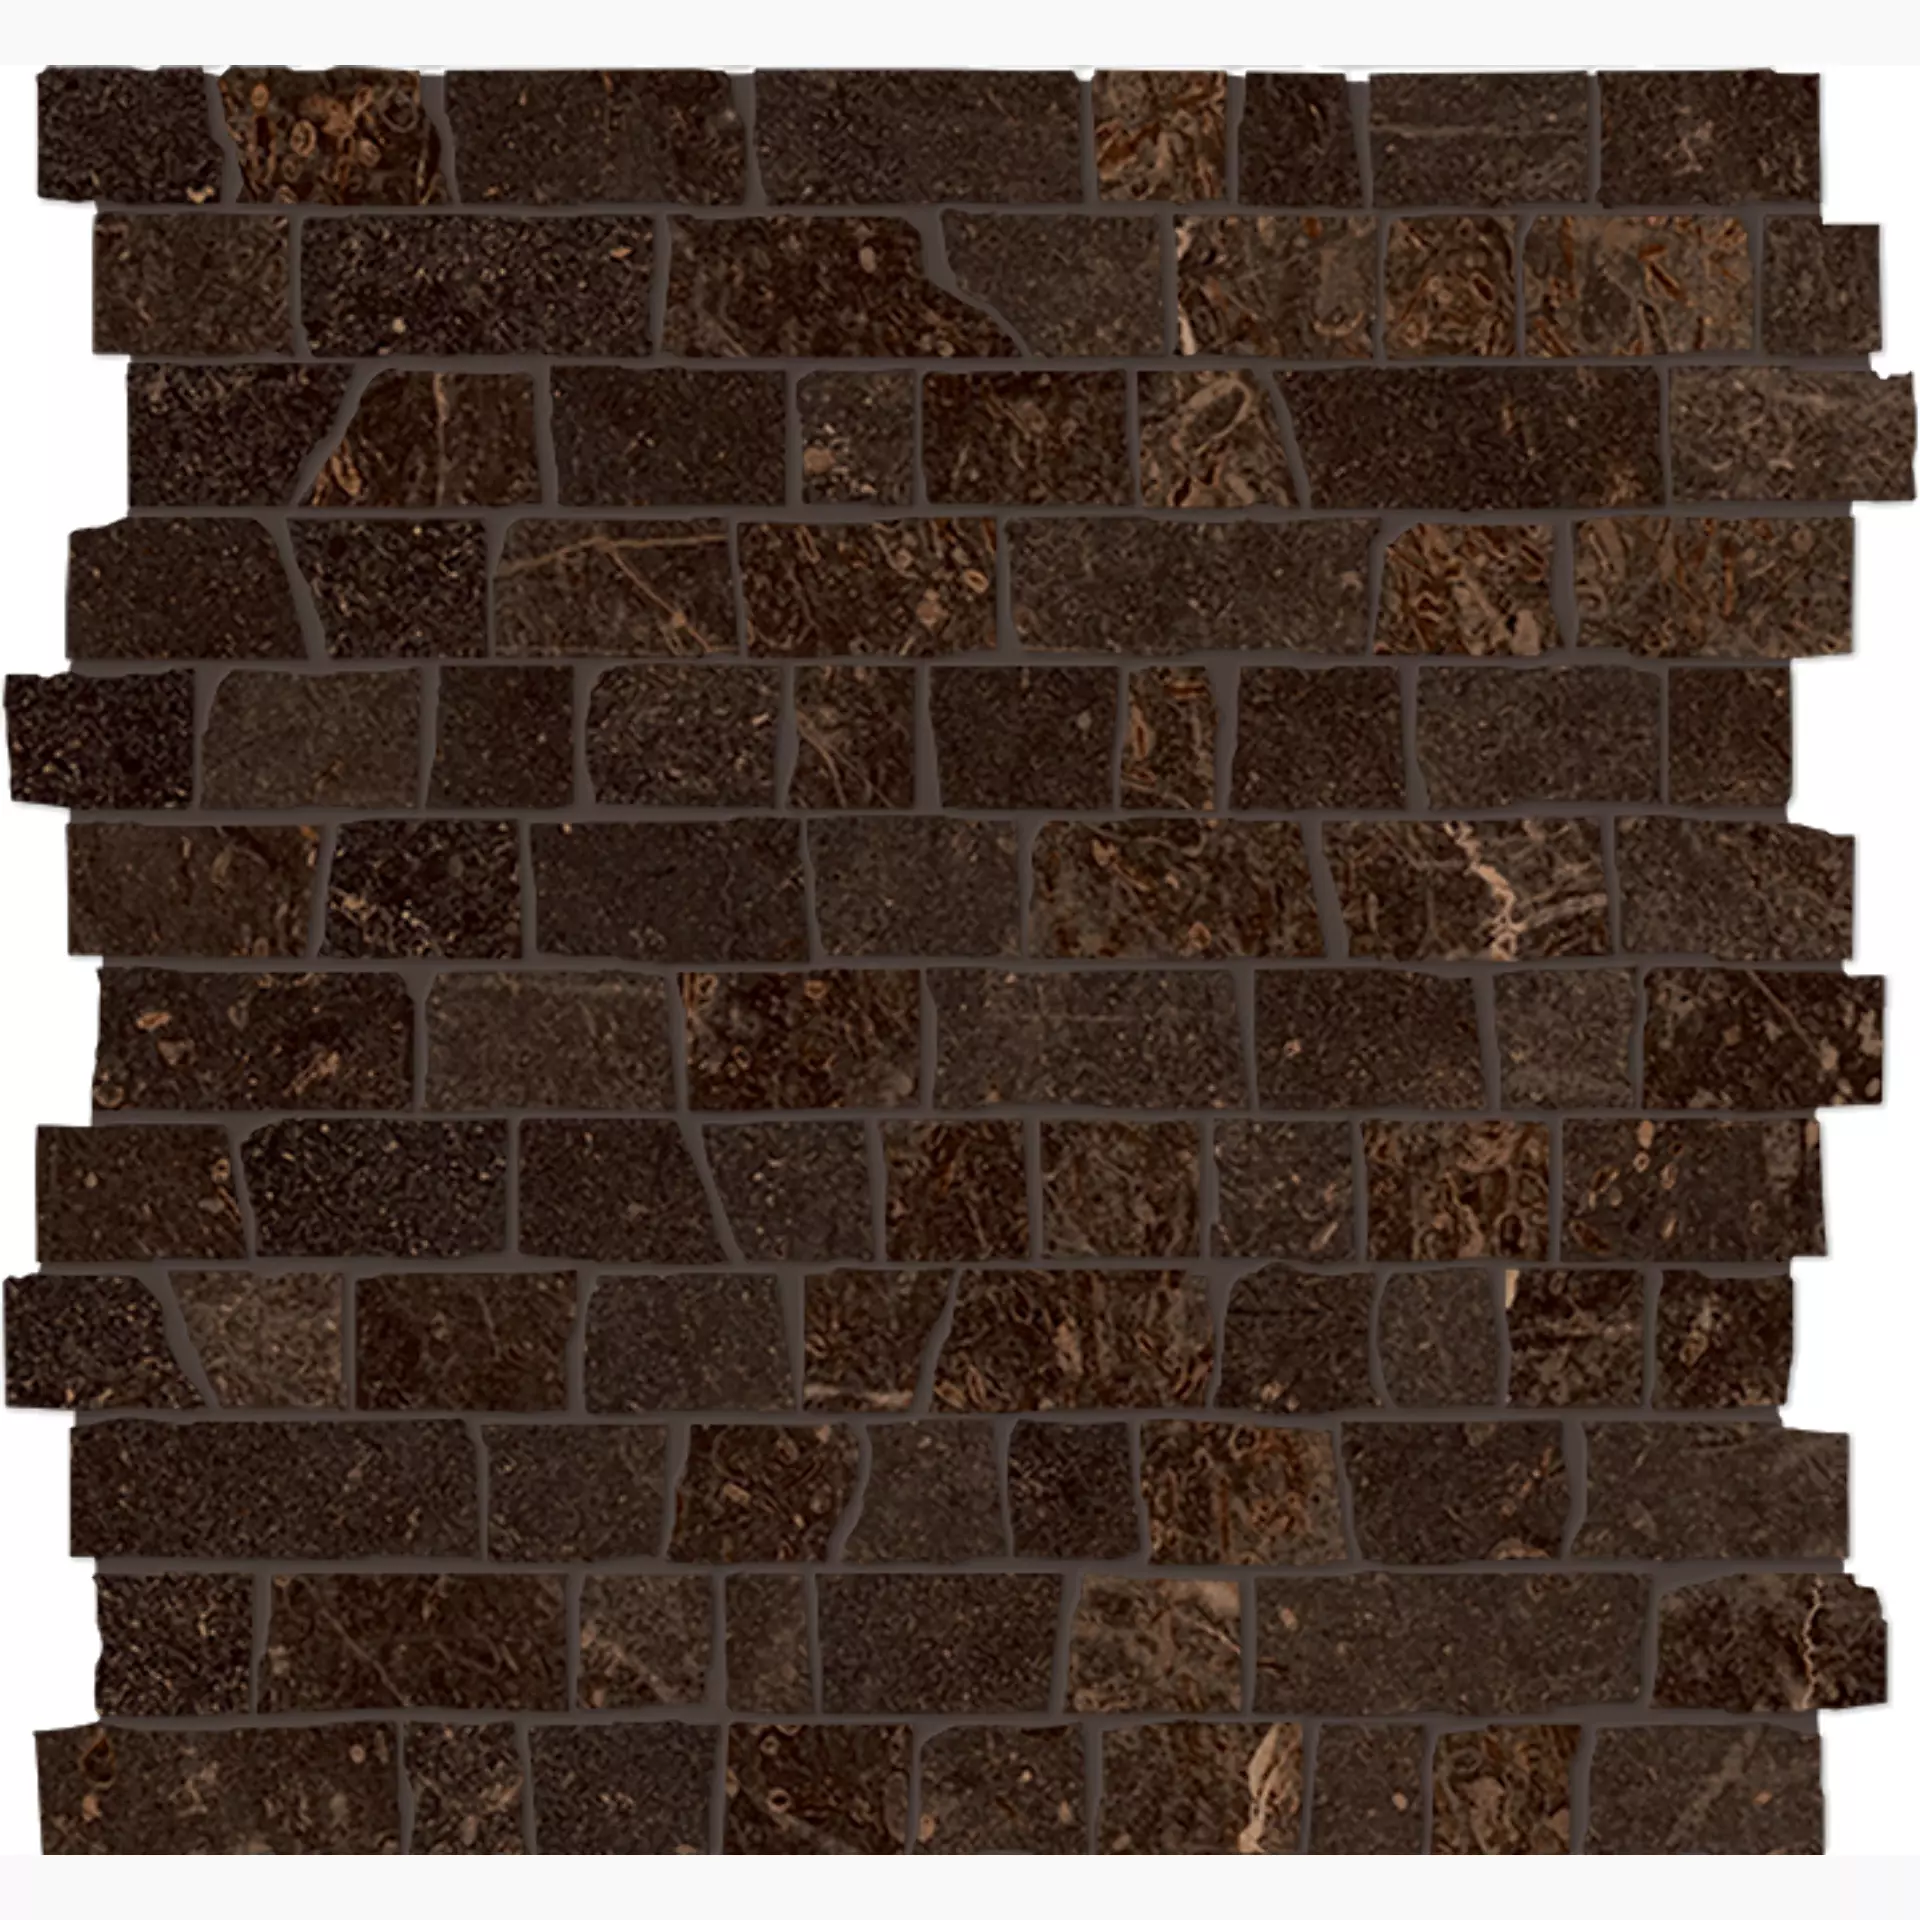 Fondovalle Planeto Jupiter Natural Mosaic Scraps PNT028A 30x30cm rectified 8,5mm